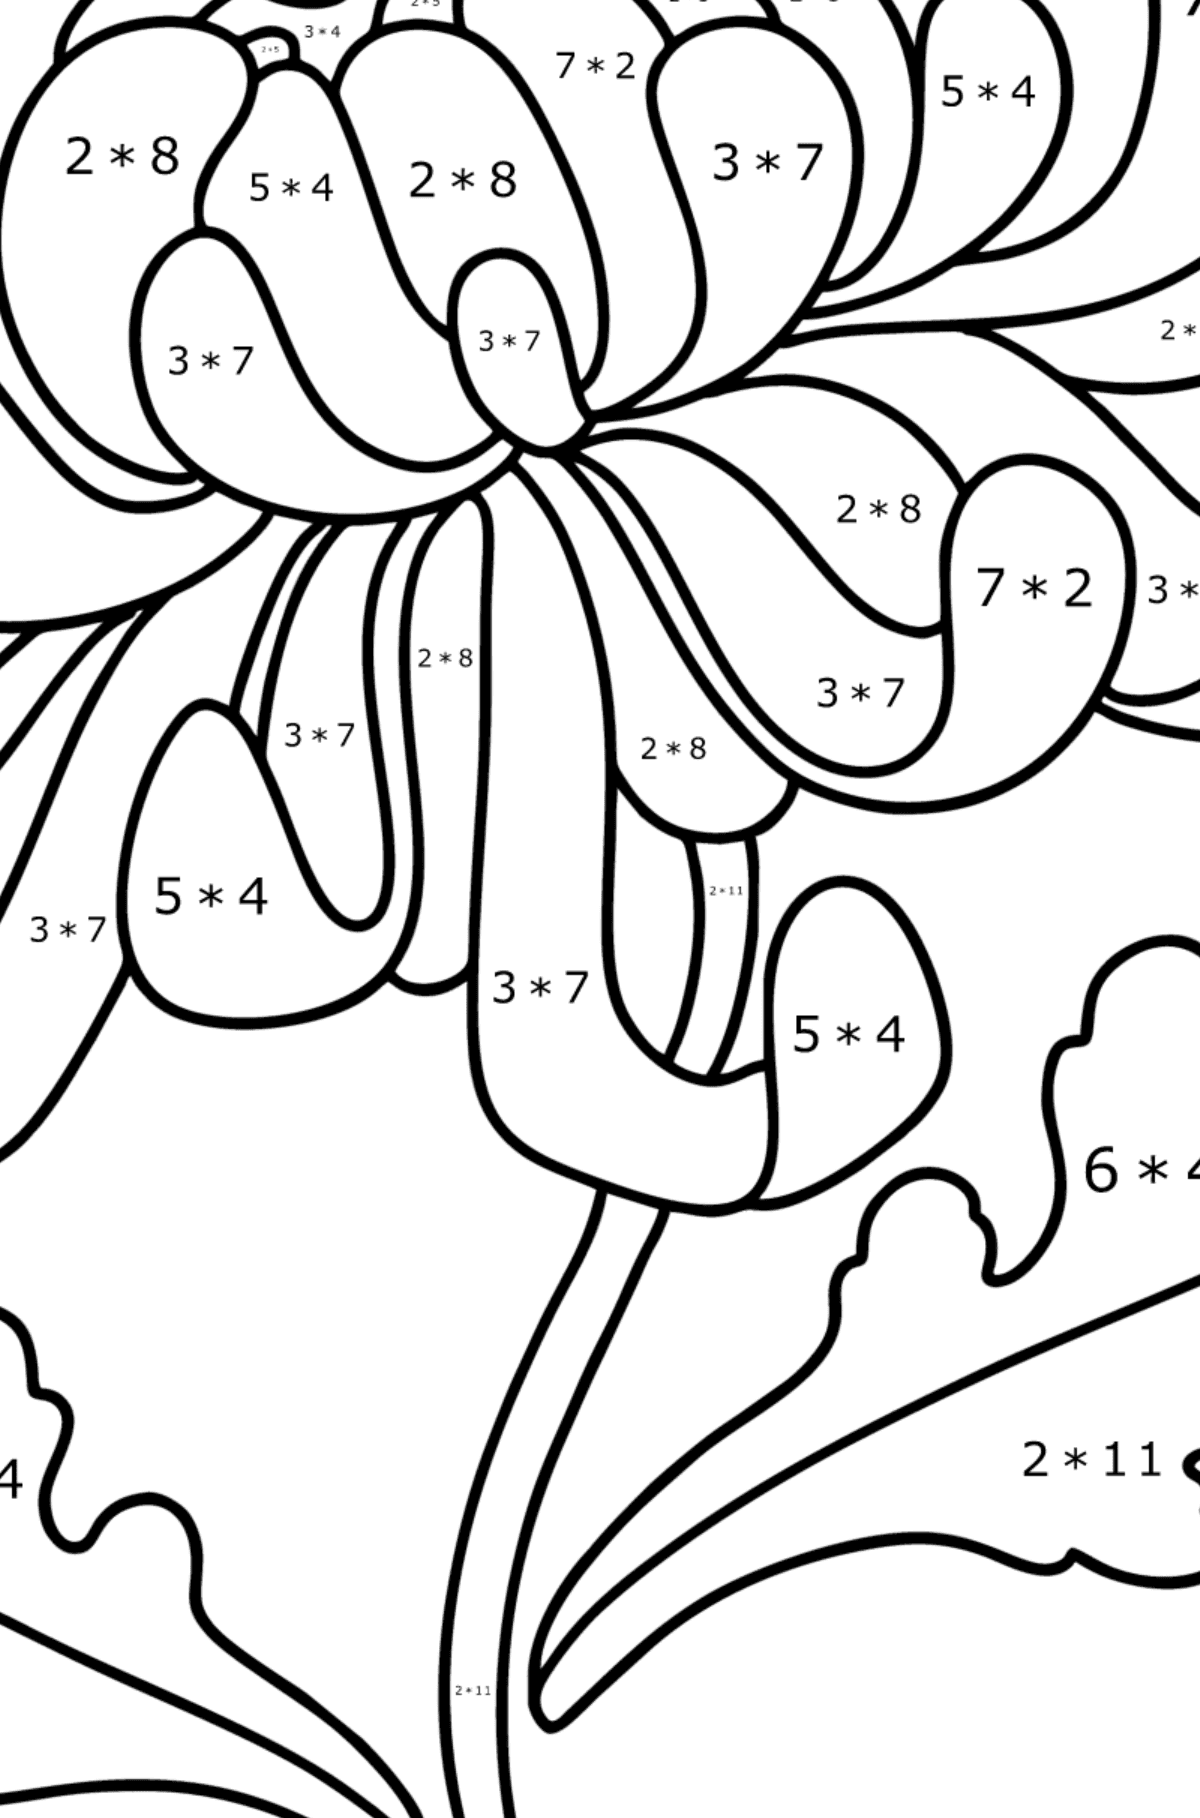 Chrysanthemums coloring page - Math Coloring - Multiplication for Kids